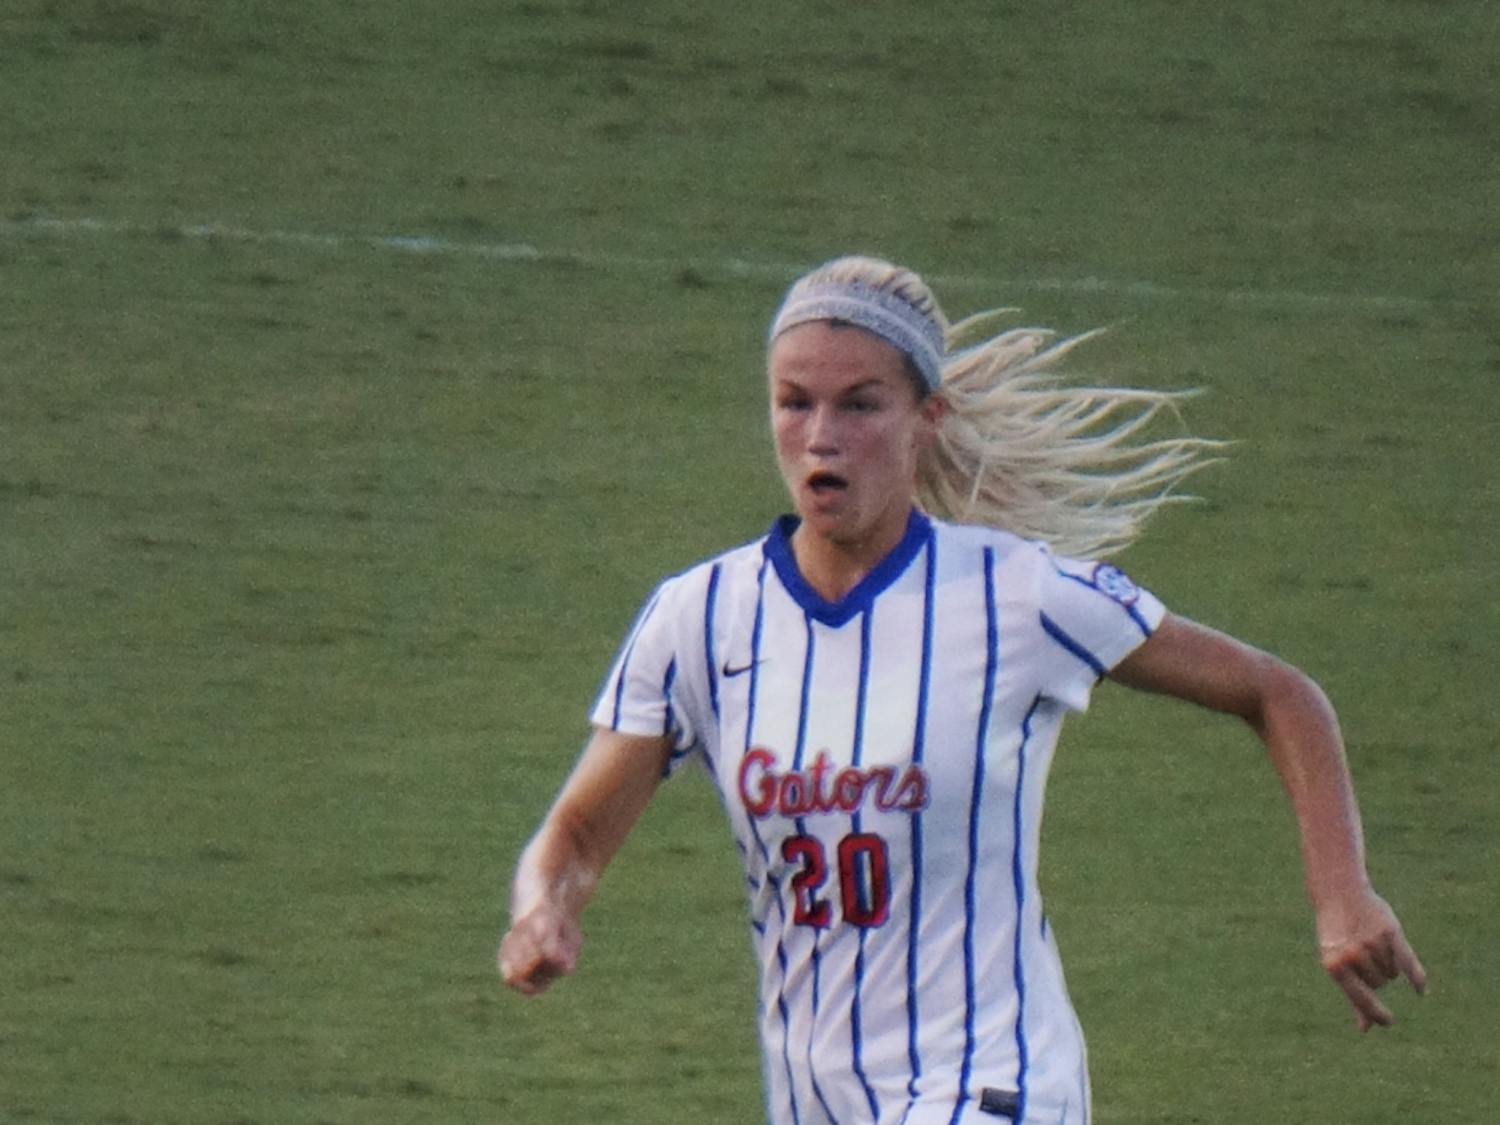 UF defender Christen Westphal dribbles during Florida's 2-1 loss to Texas A&amp;M on Sept. 10, 2015, at Donald R. Dizney Stadium.